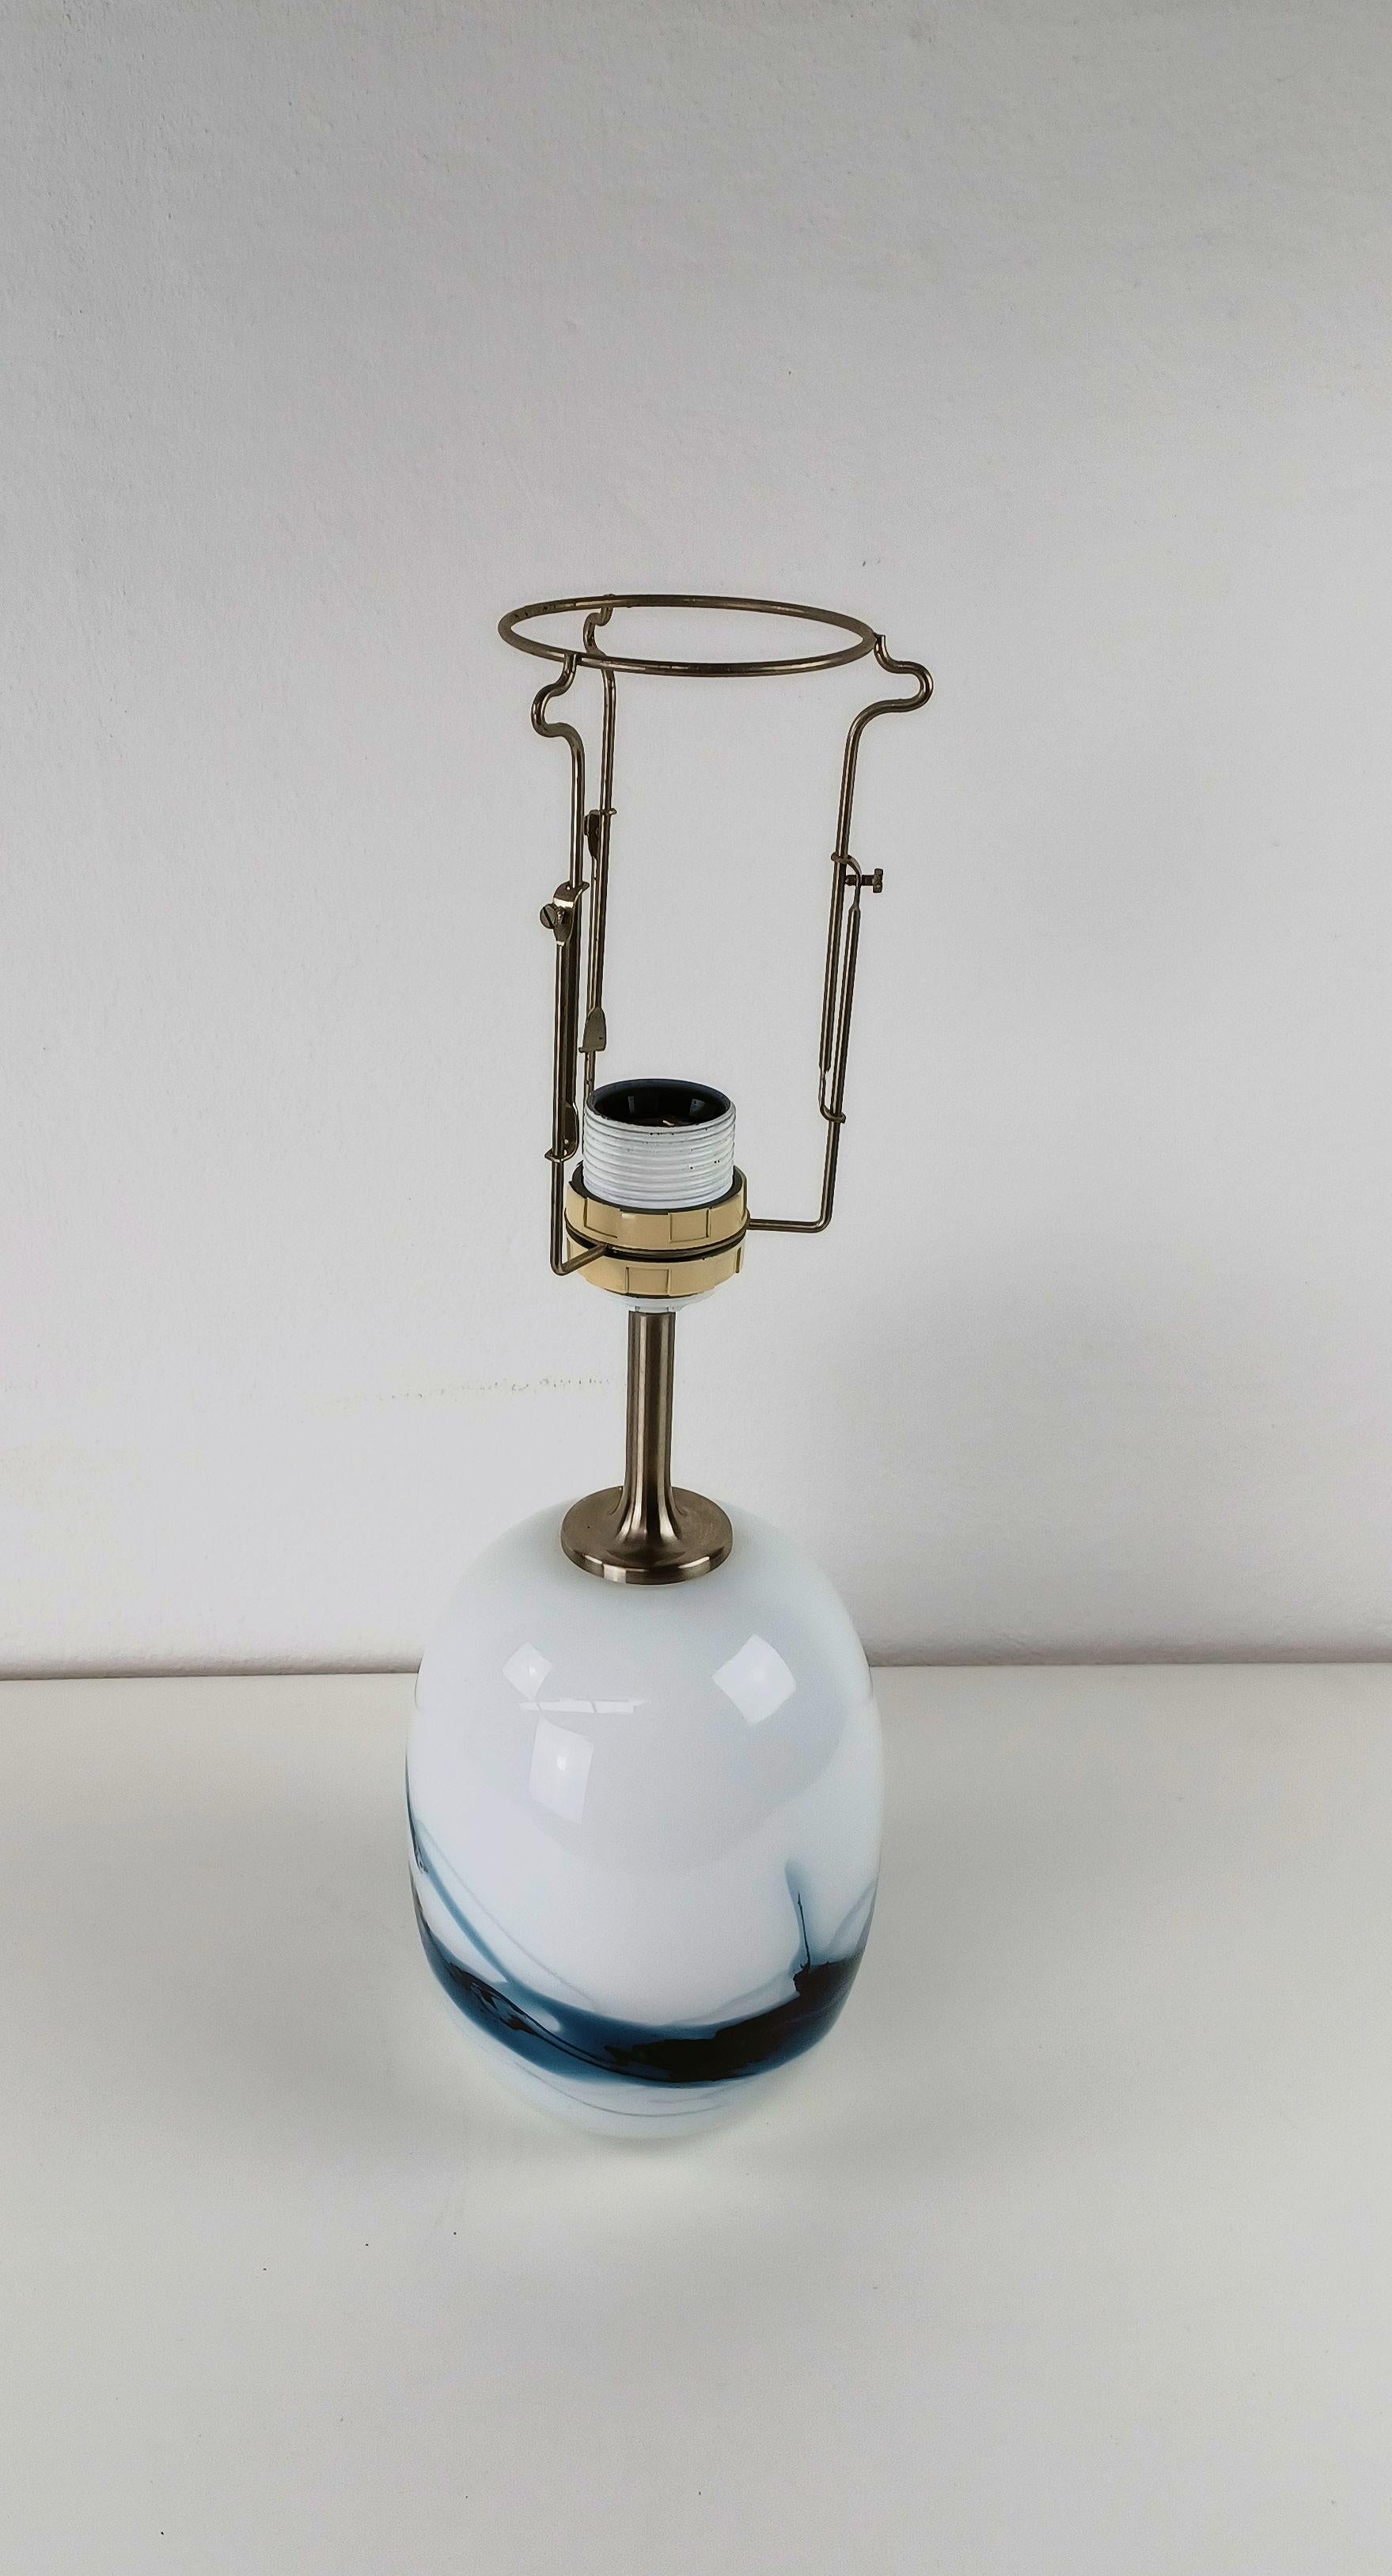 1980's Michael Bang Sakura Handblown Glass Table Lamp

The table lamp was designed in 1984 by Mickael Bang for Holmegaard Glass and is in very good condition.

Height of the tablelamp is up to where the socket begins.